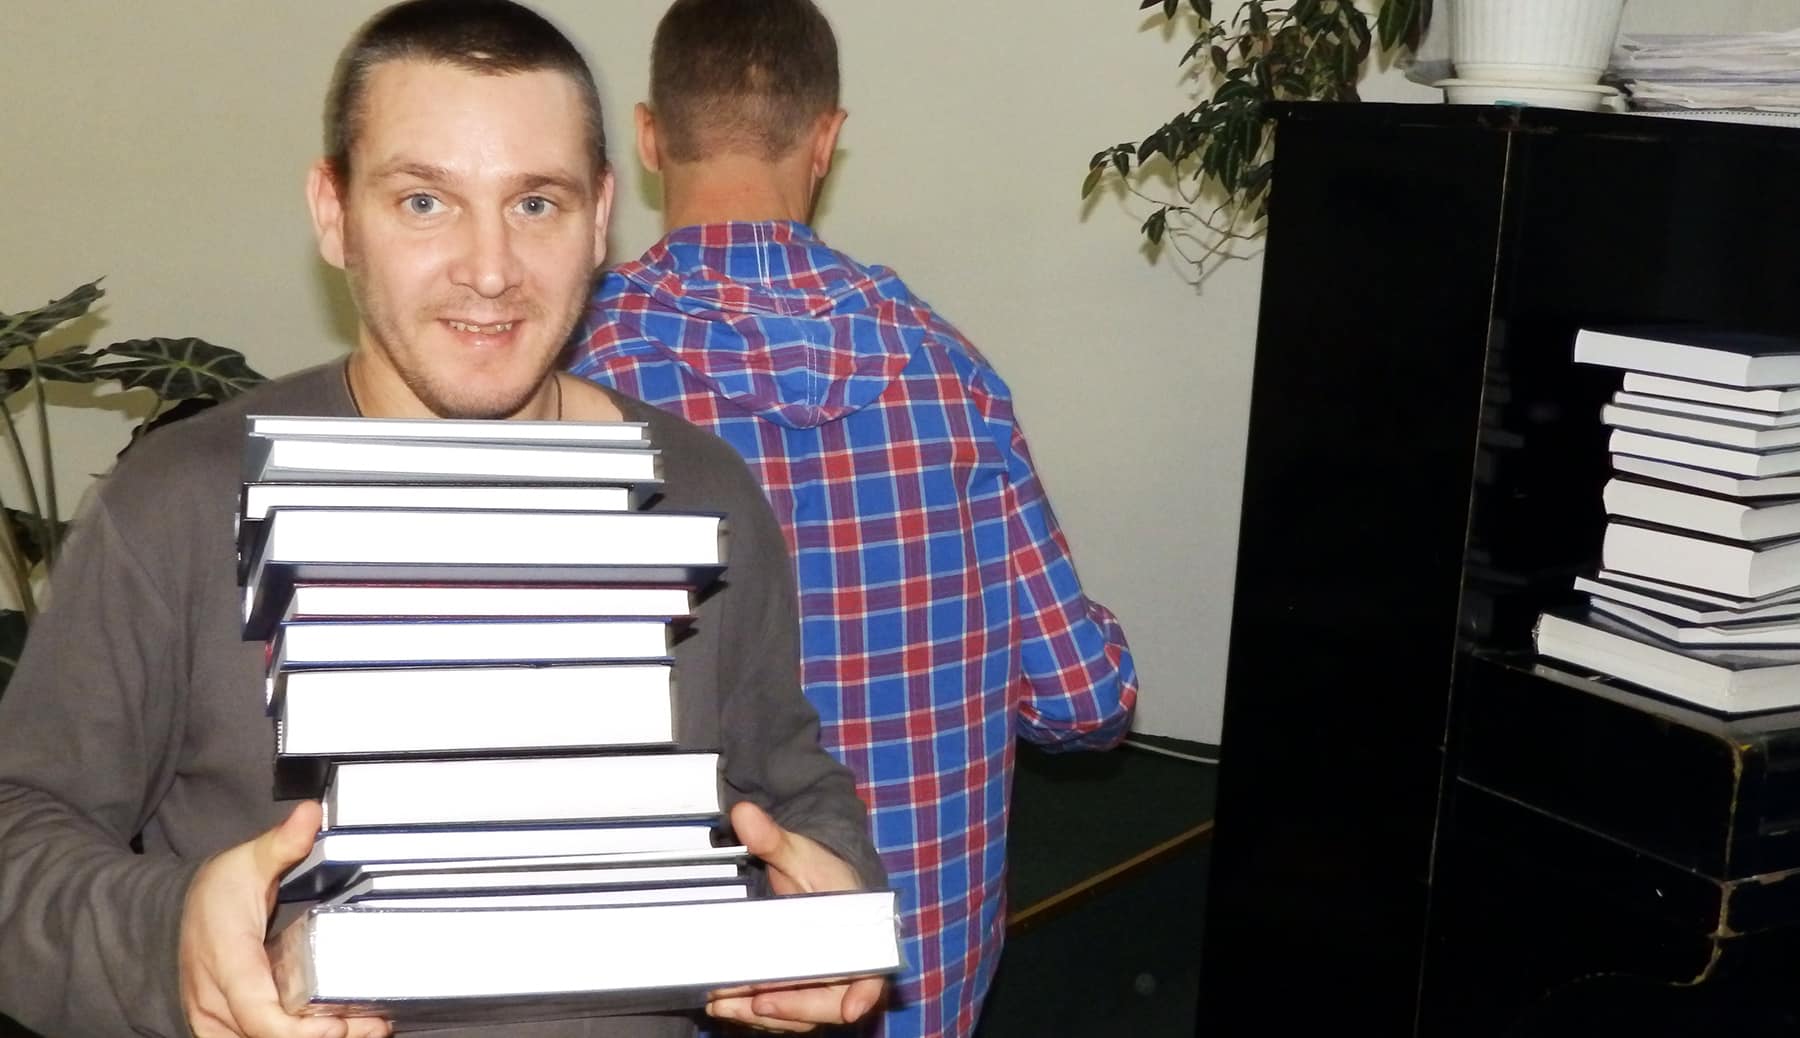 Russian man holding pile of books